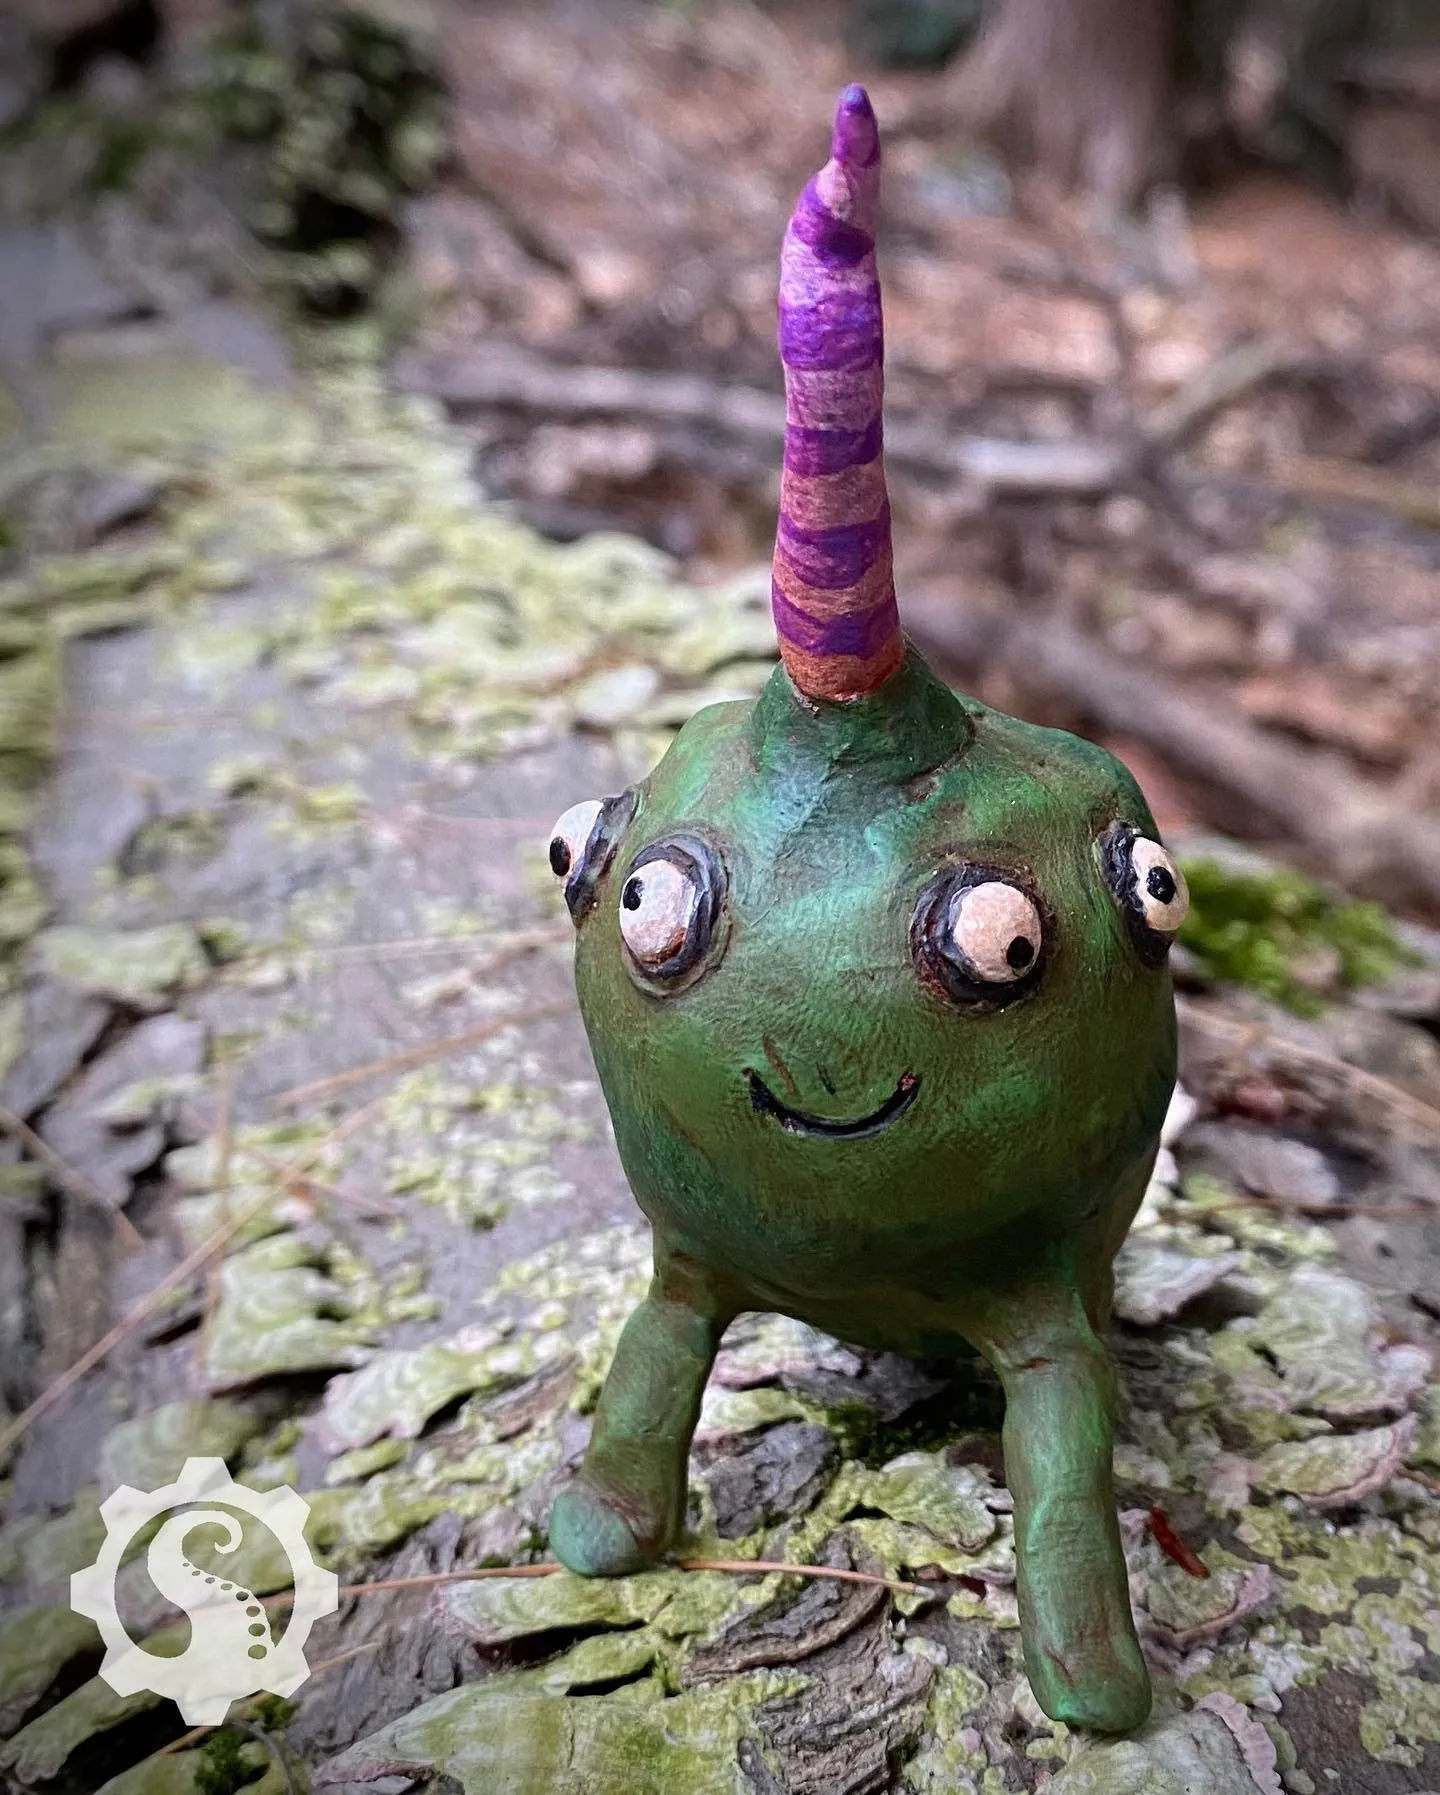 Smiling green creature with four bulgy eyes looking in all different directions. A long pink and purple striped horn juts forward from the top of its head. He looks very friendly.